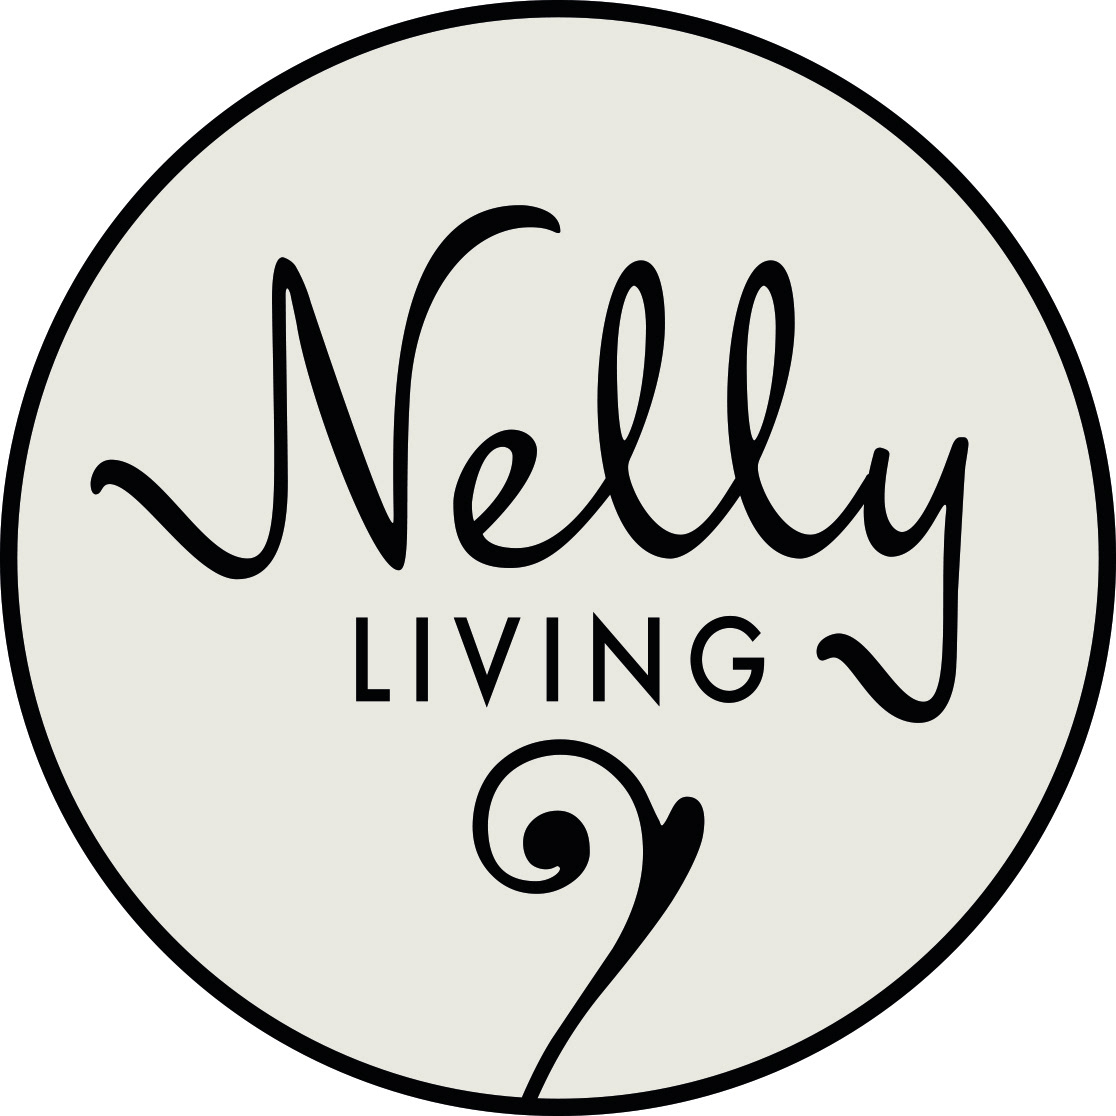 Nelly Living